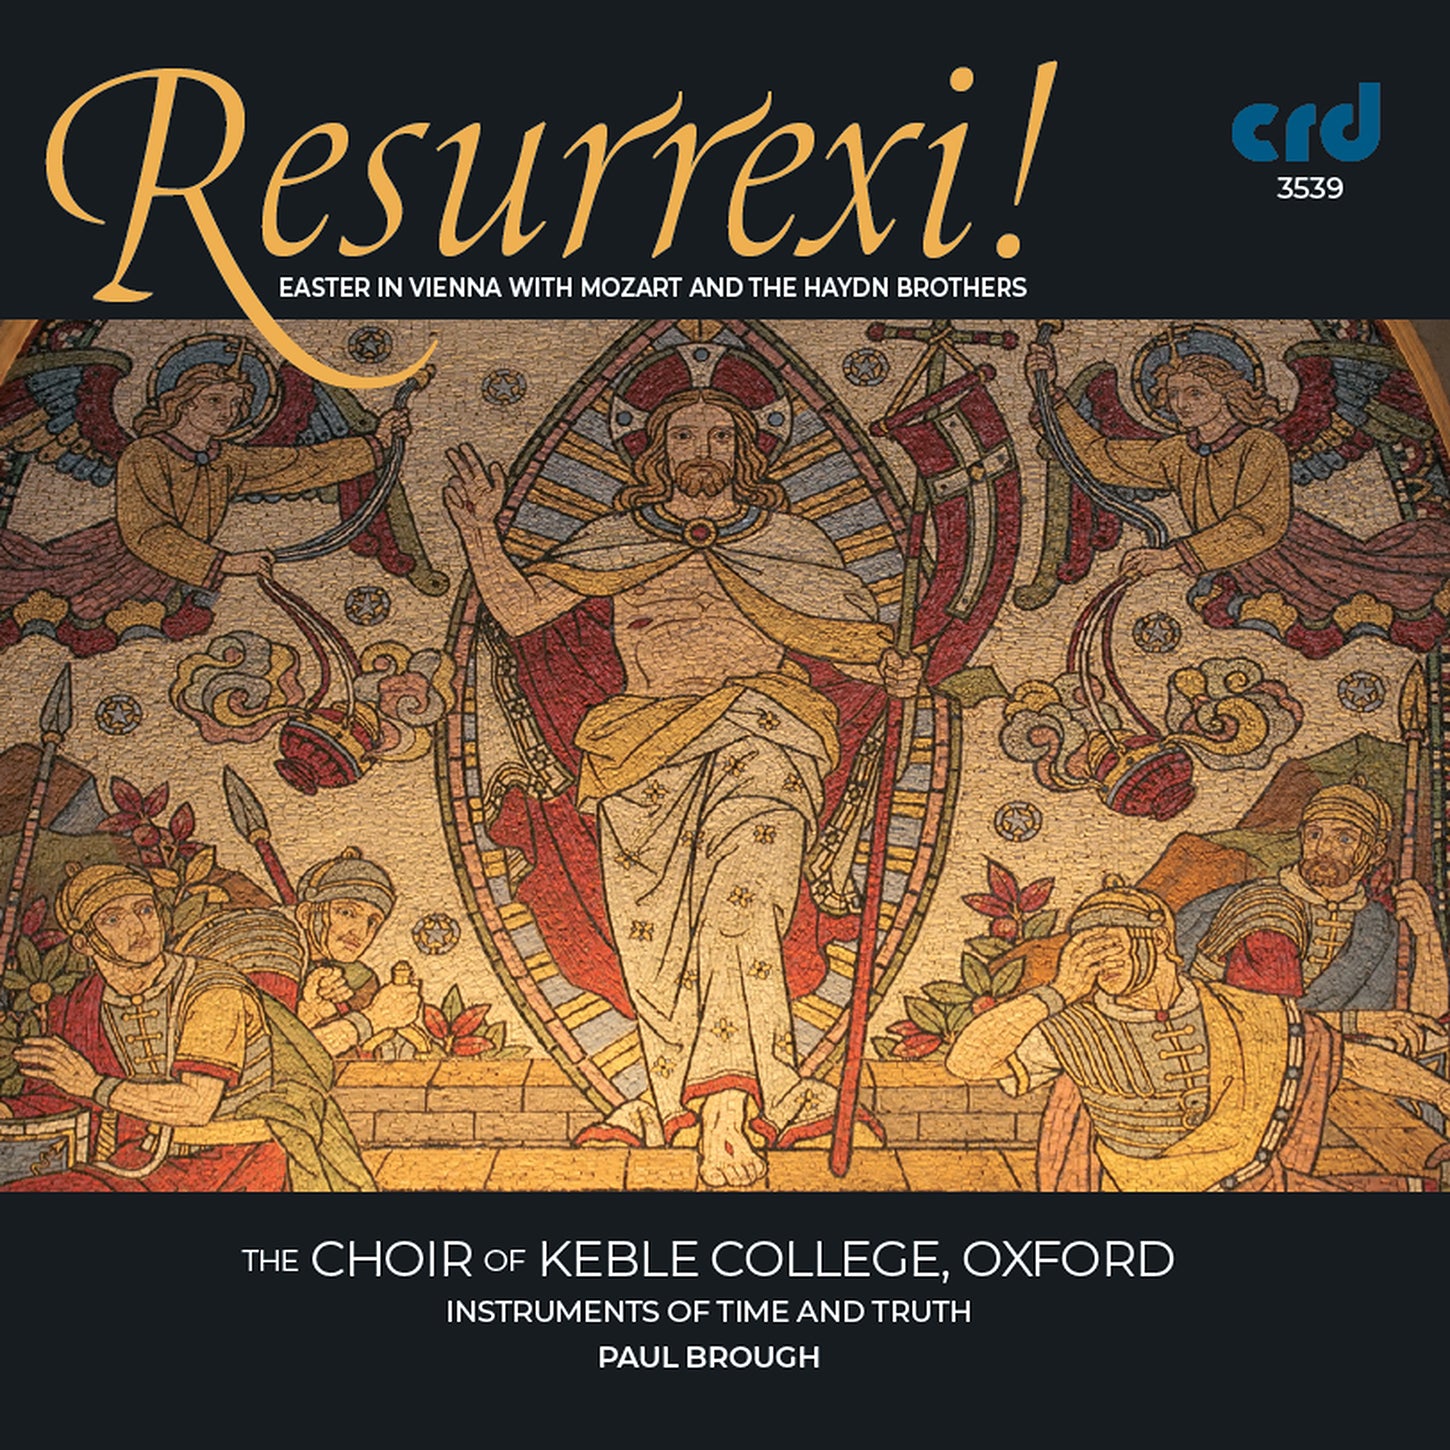 Resurrexi! Easter in Vienna with Mozart & the Haydn Brothers / Brough, Keble College Choir Oxford, Instruments of Time and Truth